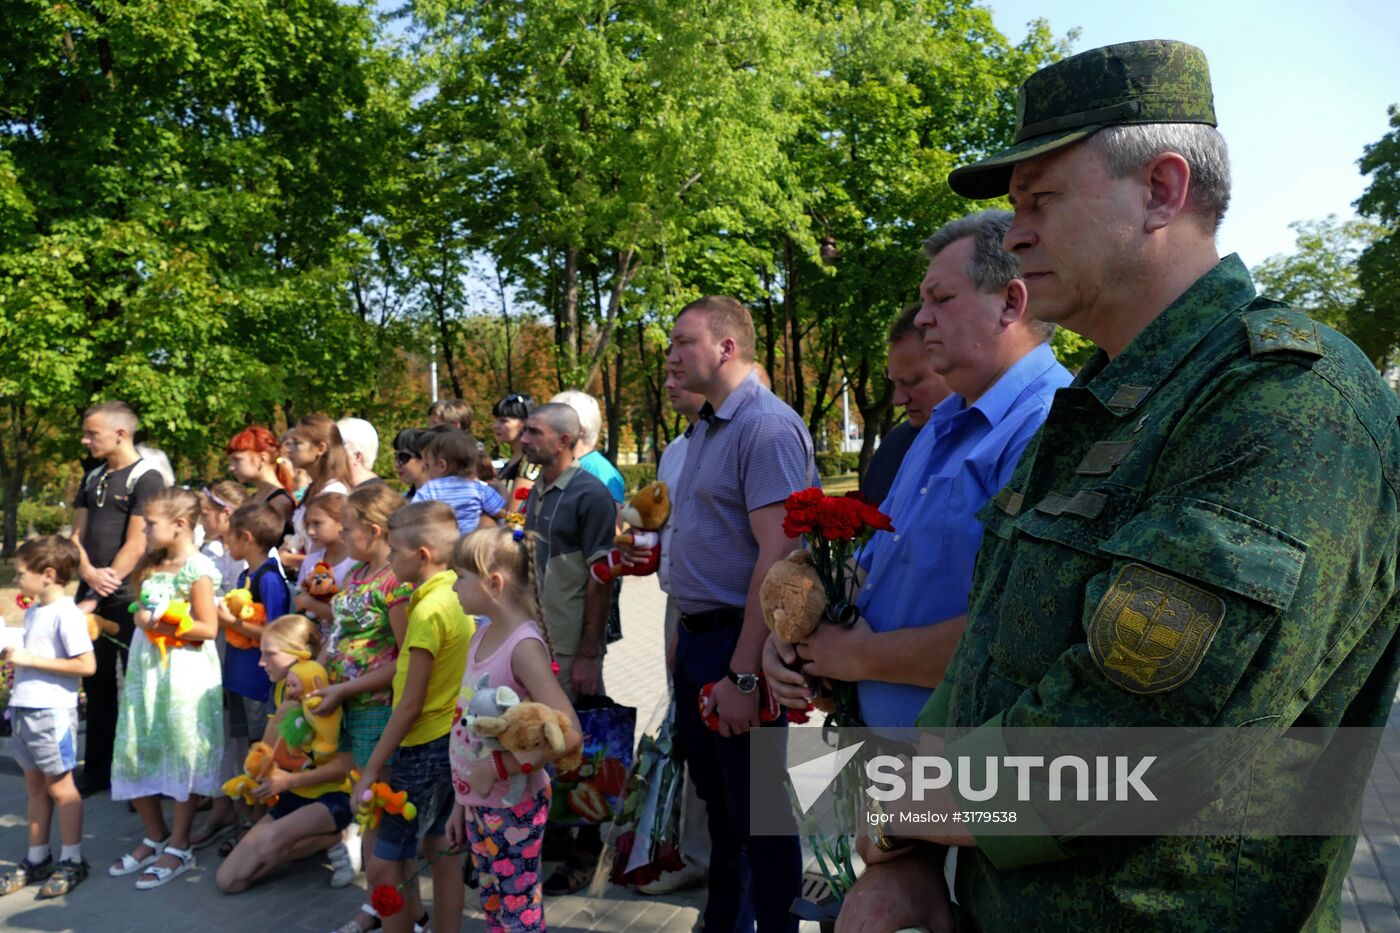 Memorial event in Donetsk for children who died during conflict in southeast Ukraine